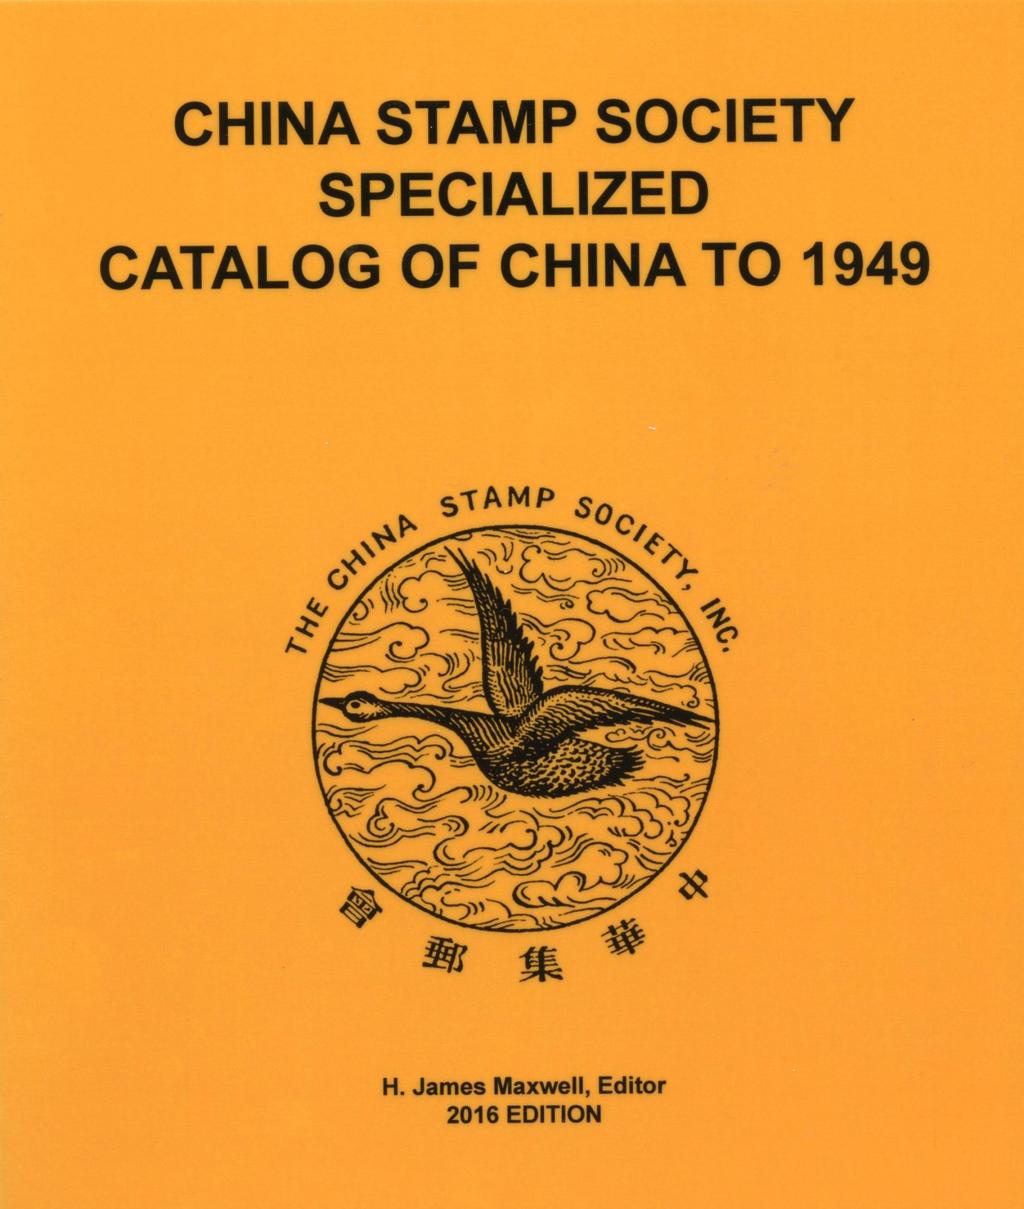 Book Review: China Stamp Society Specialized Catalog of China to 1949 reviewed by Alan Warren China Stamp Society Specialized Catalog of China to 1949, ed. H. James Maxwell. Approx.